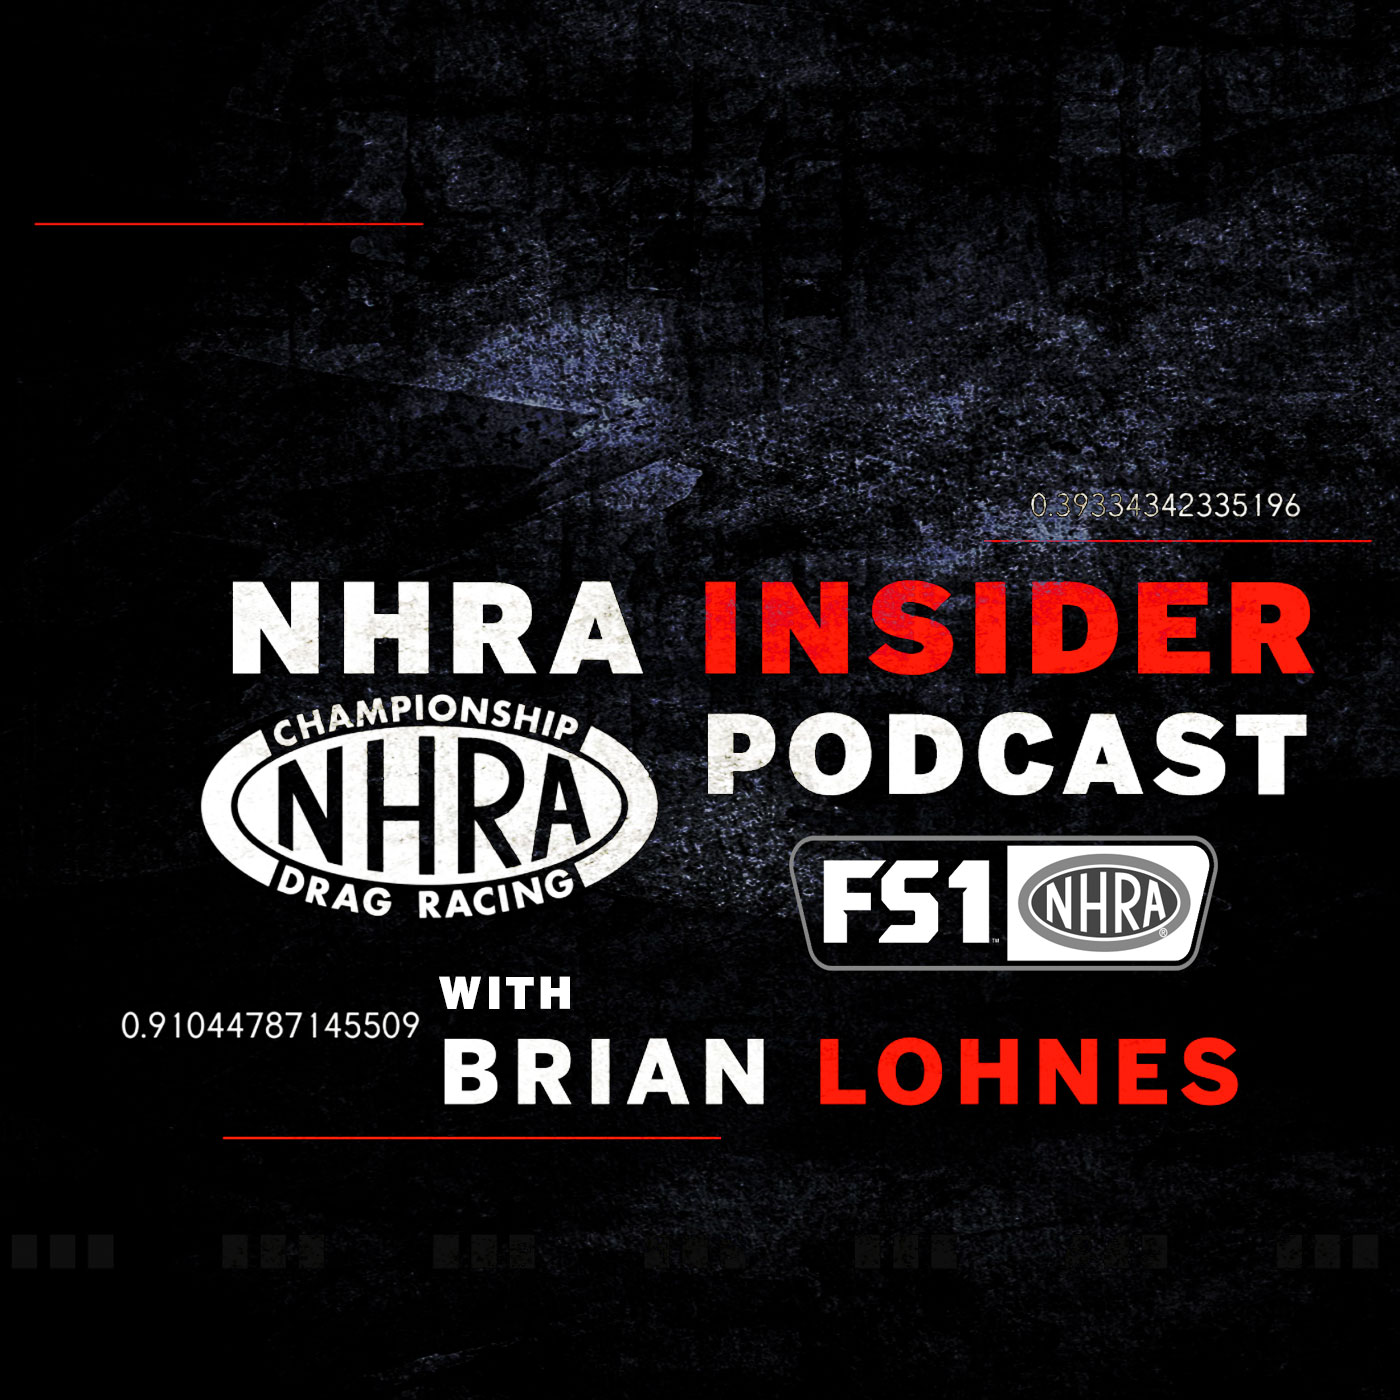 NHRA Insider: An Author, A Racer, and A Look Inside The Biggest Stories of 2021